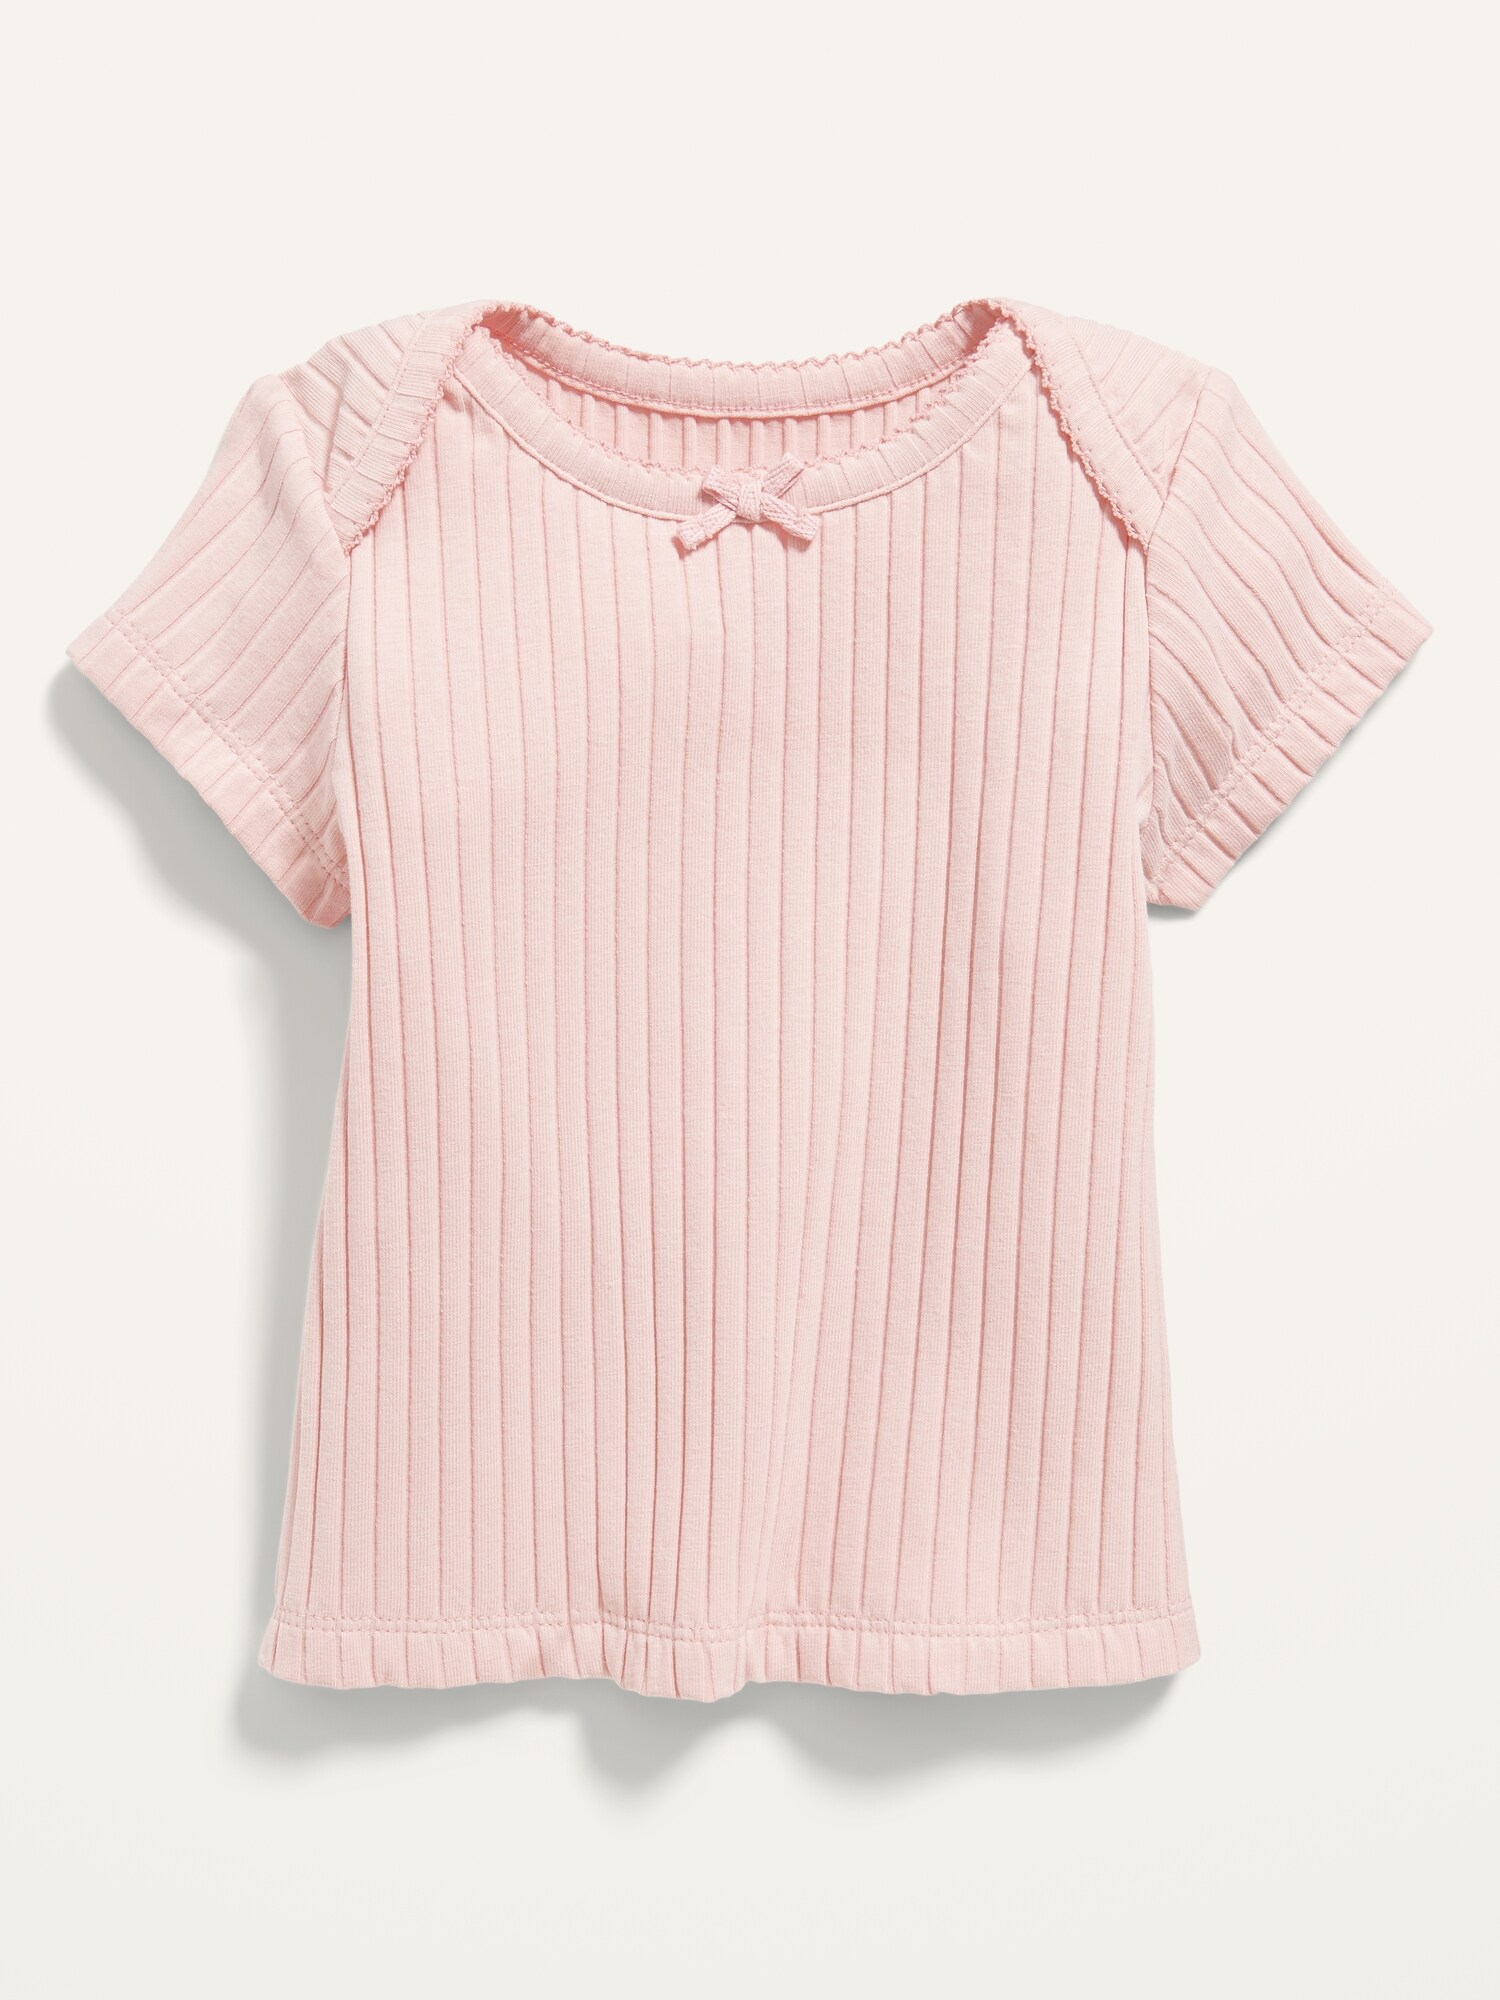 Short-Sleeve Rib-Knit Top for Baby